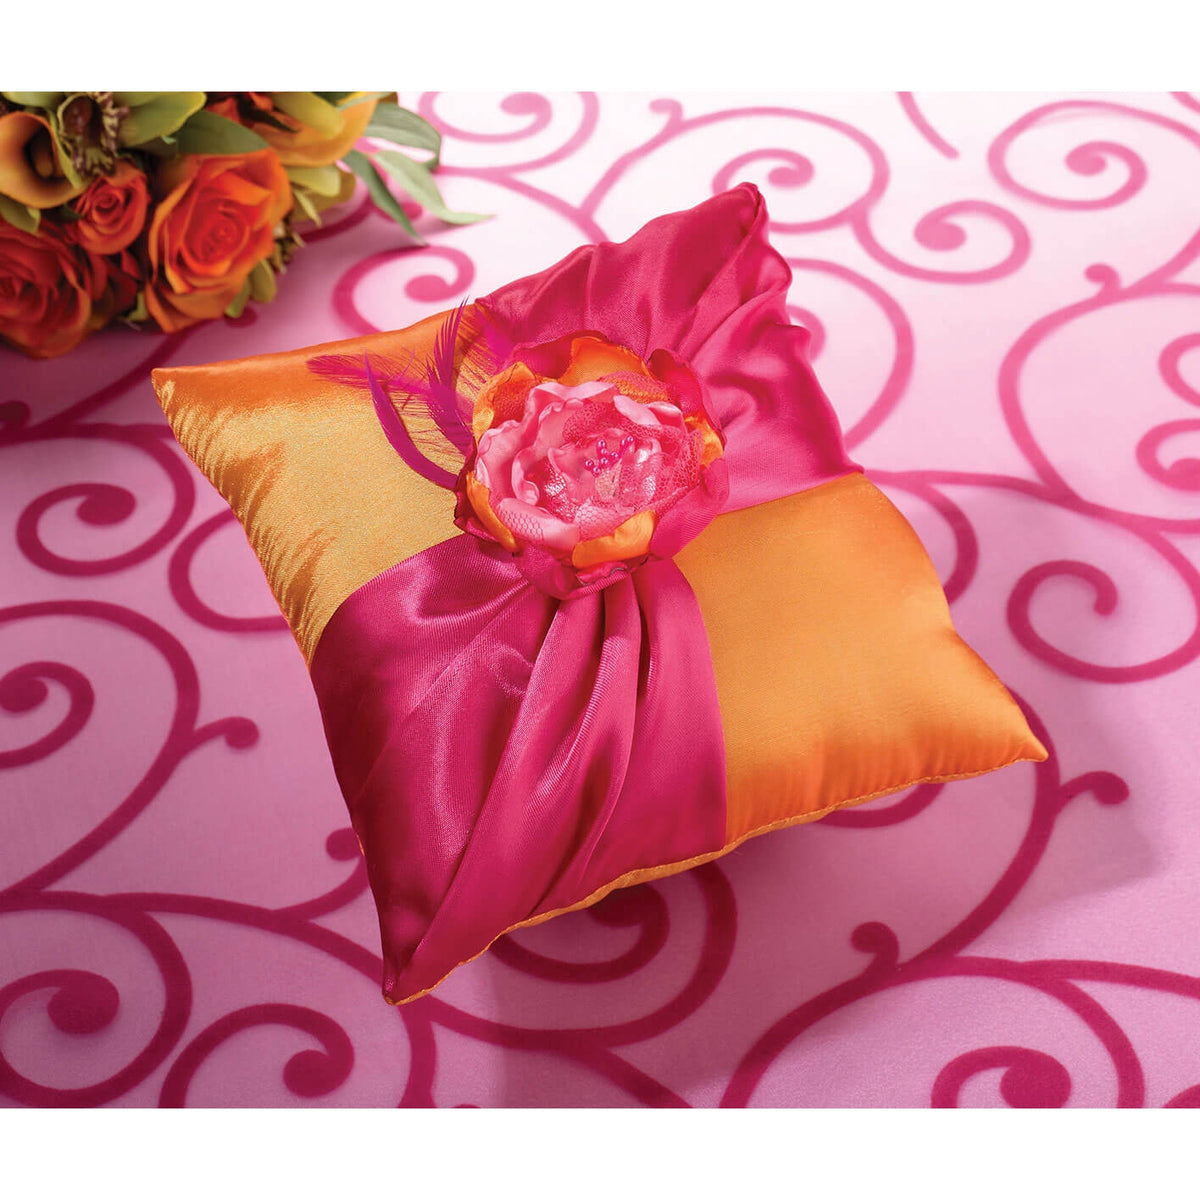 HOT PINK AND ORANGE RING BEARER PILLOW | Ring Pillow - Minter and Richter Designs